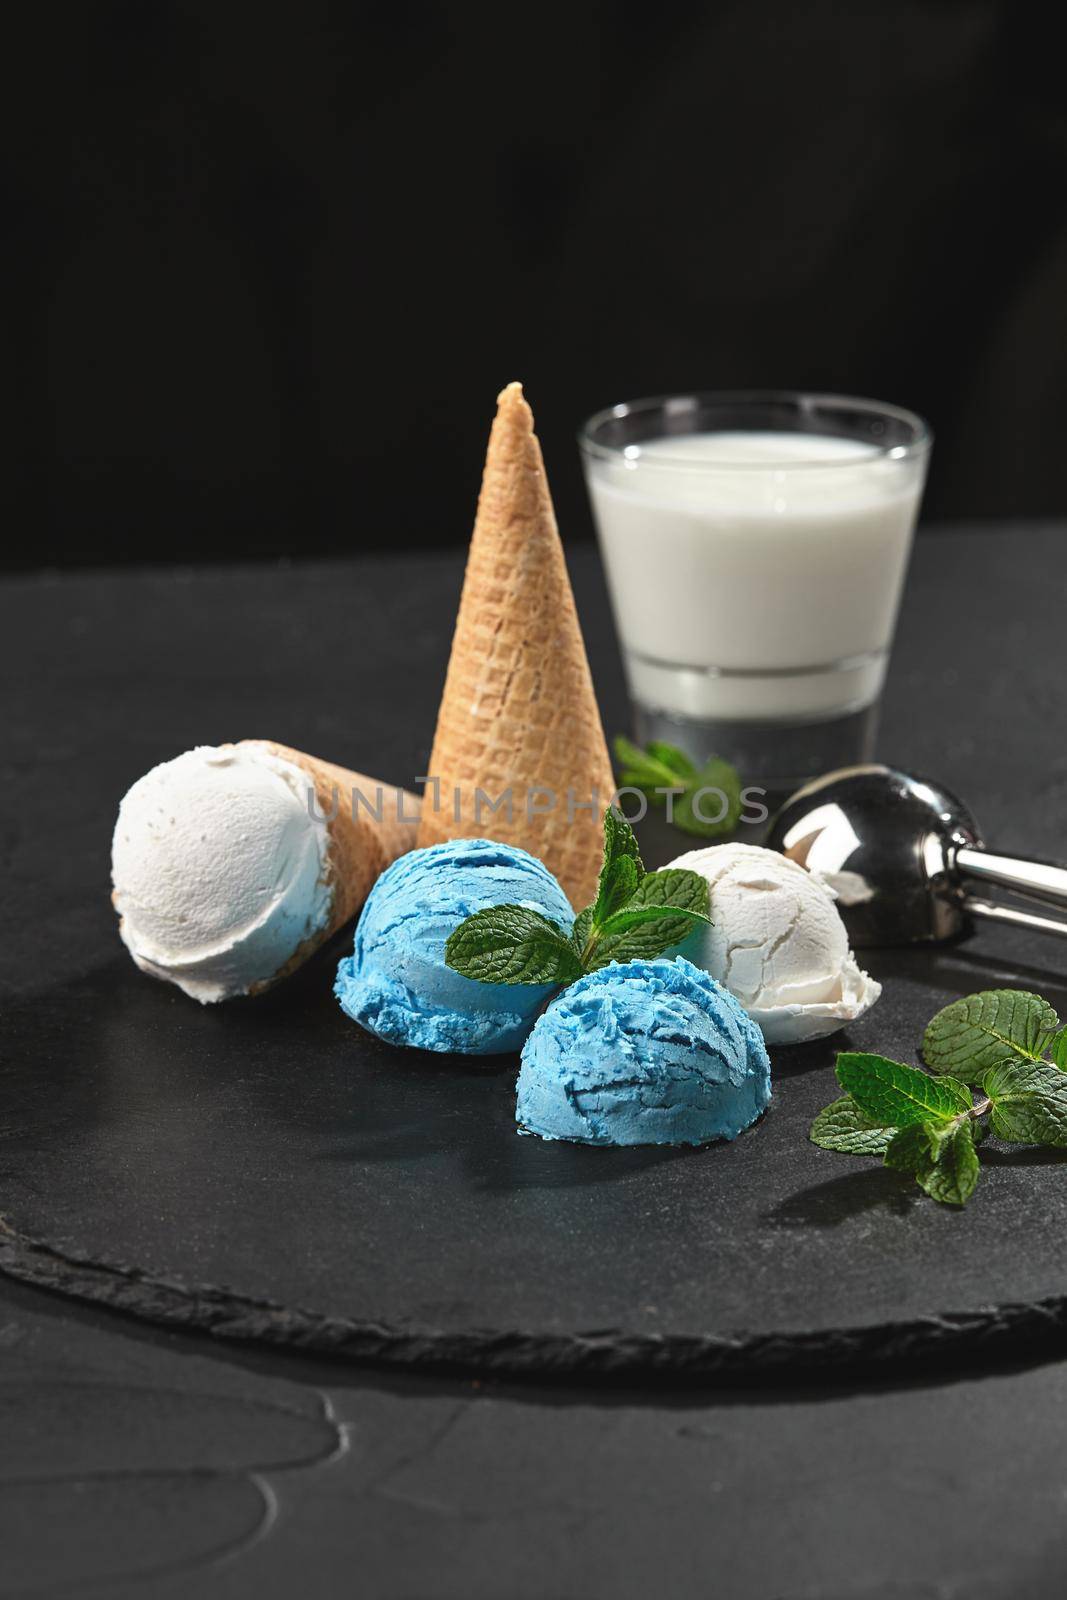 Close-up shot of a tasty natural creamy and blueberry ice cream decorated with fresh mint, and waffle cones are served on a stone slate, standing on a dark table over a black background. Metal scoop and a glass of milk is nearby.